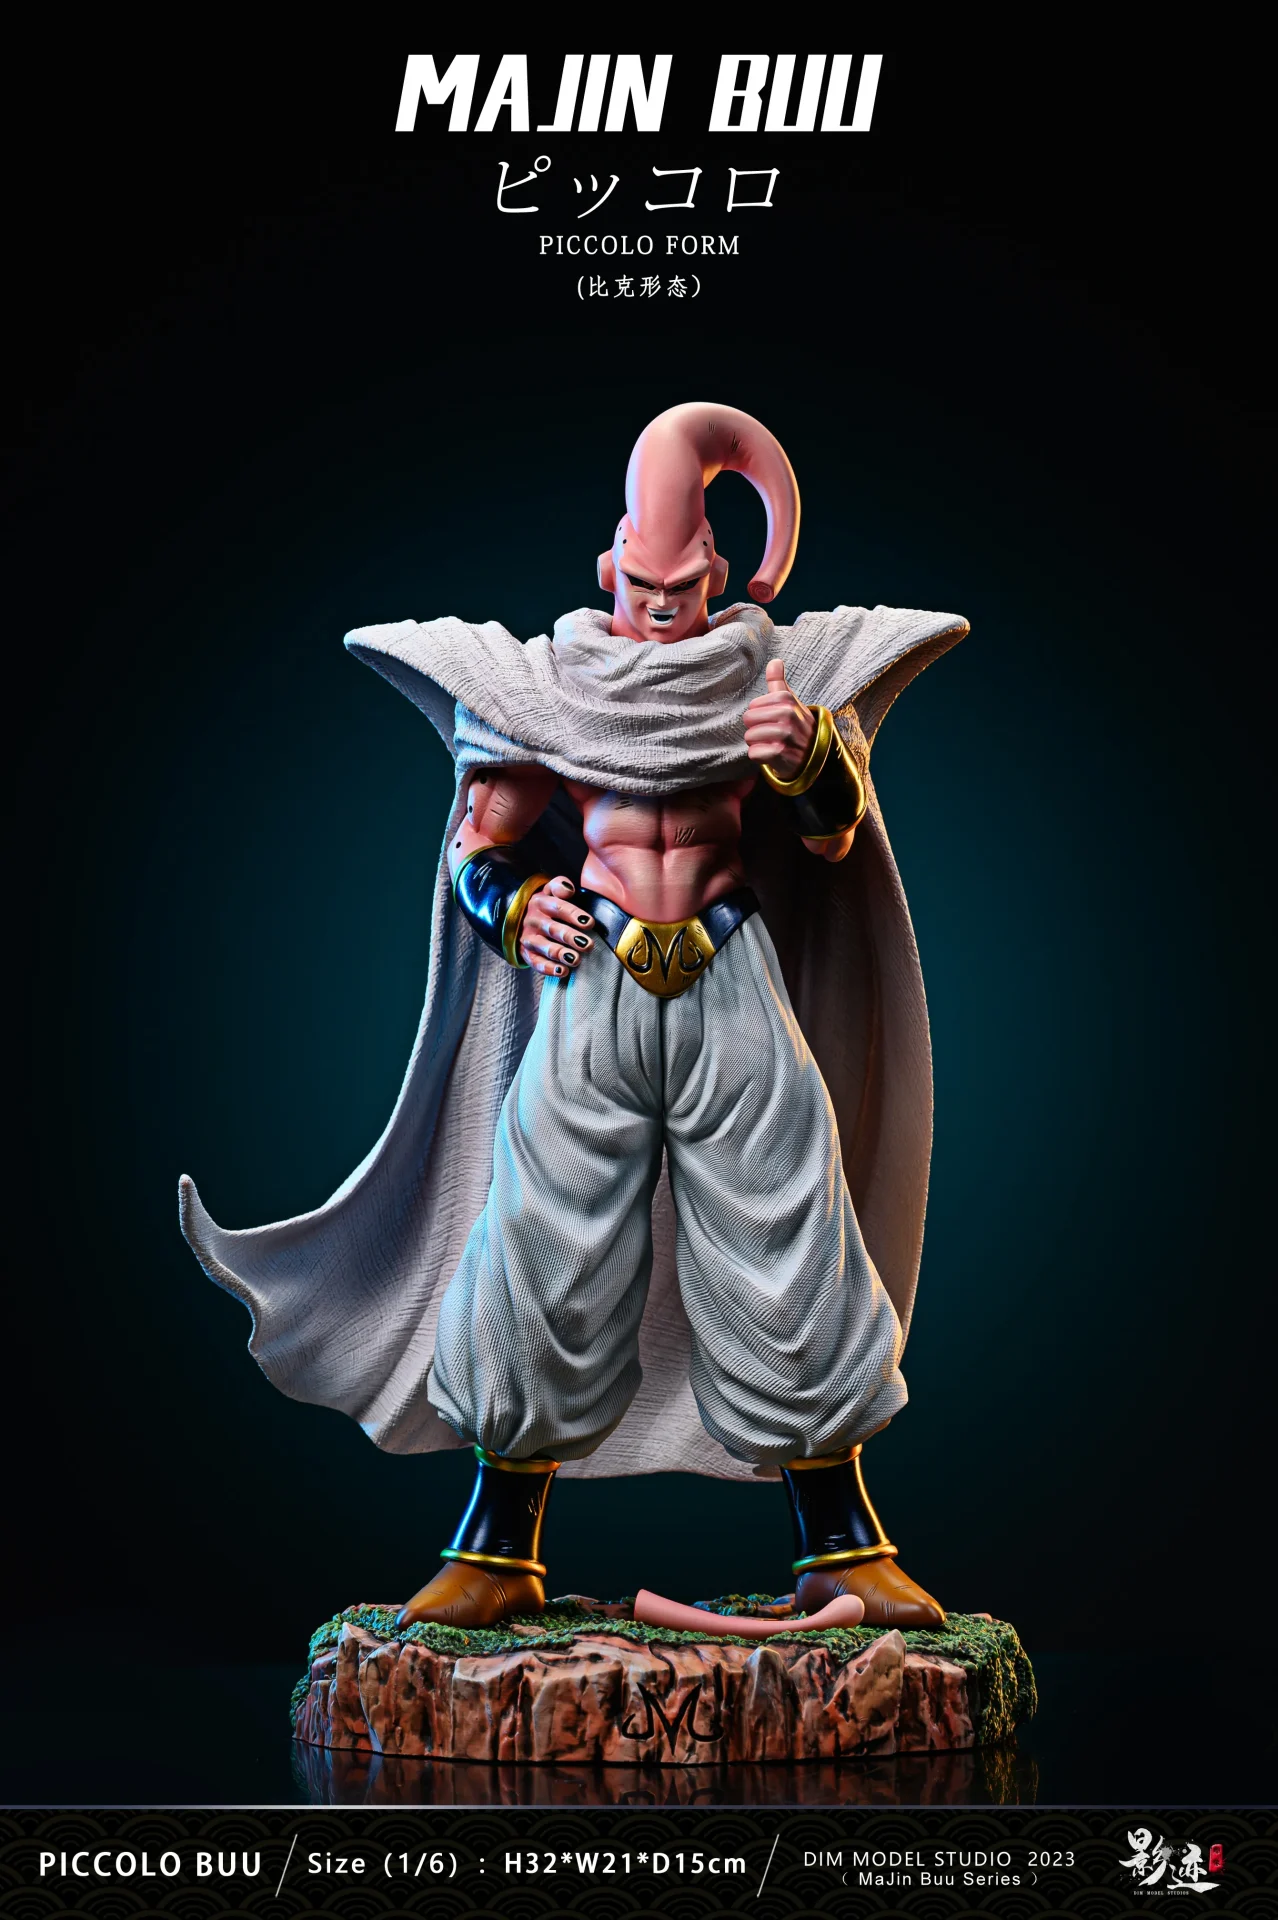 barb sauvage recommends majin buu forms pic